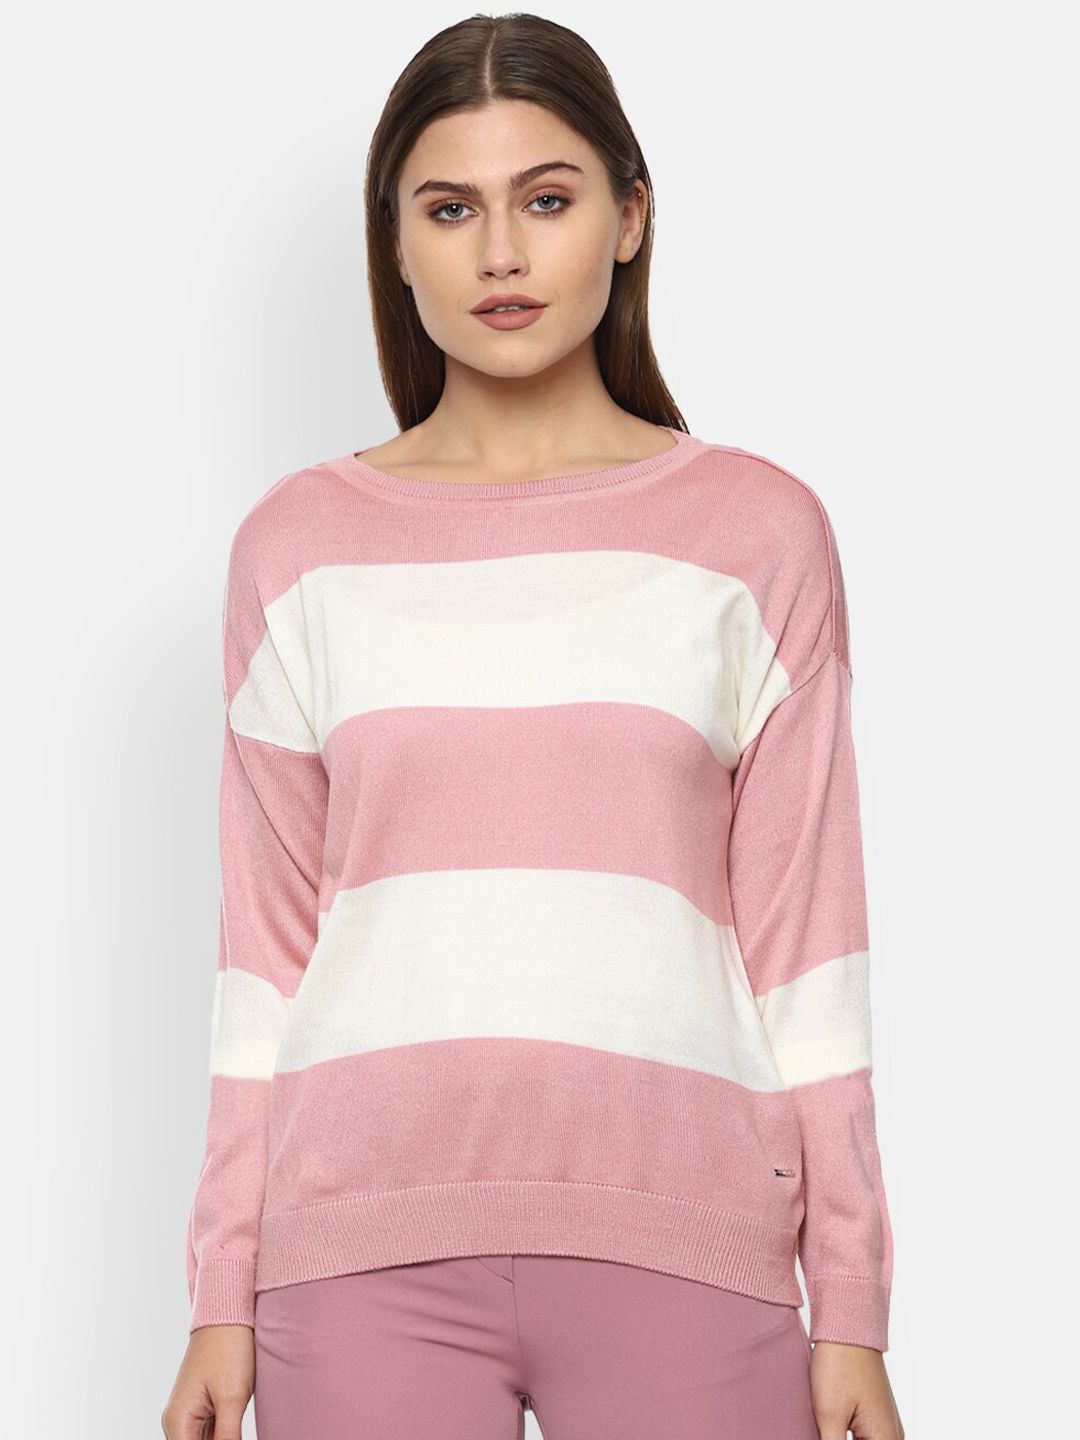 Van Heusen Woman Pink & White Striped Pullover Price in India